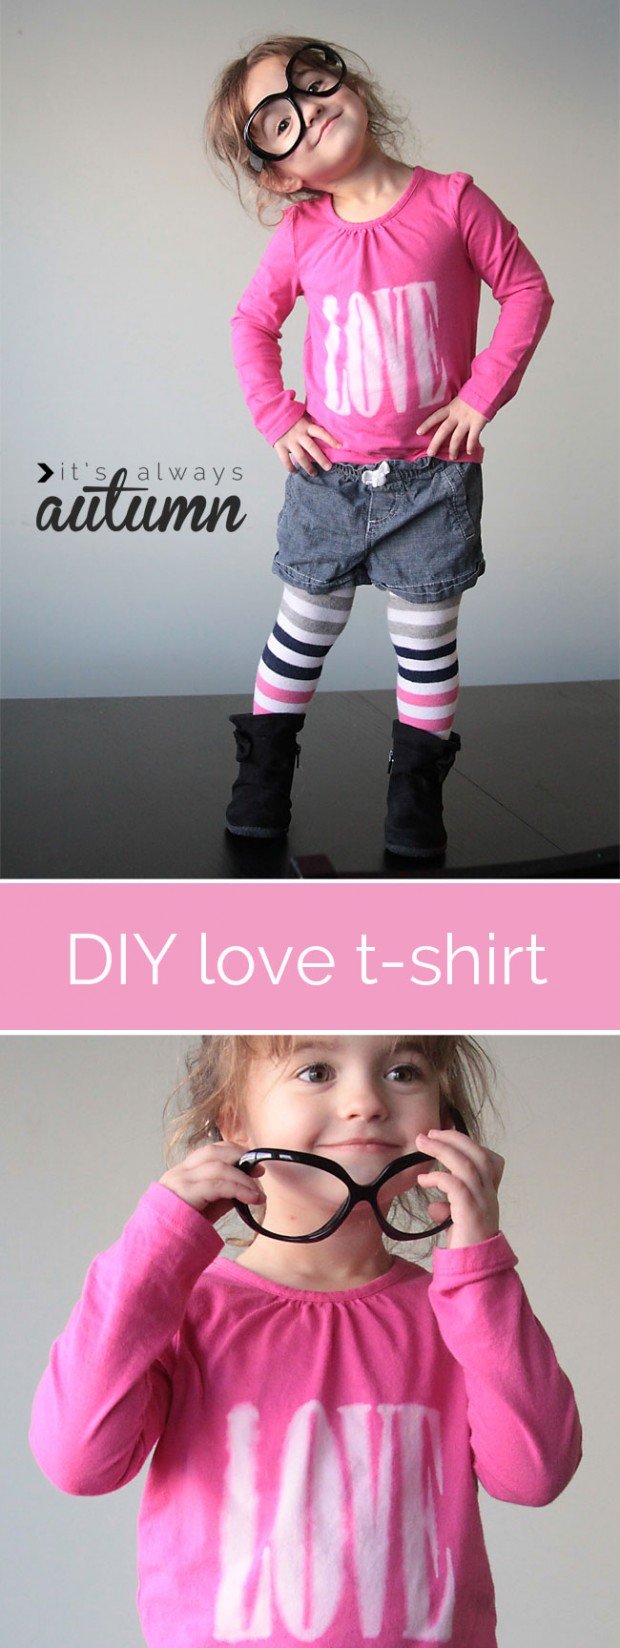 18 Adorable DIY Clothing Projects for Your Little Ones  (14)